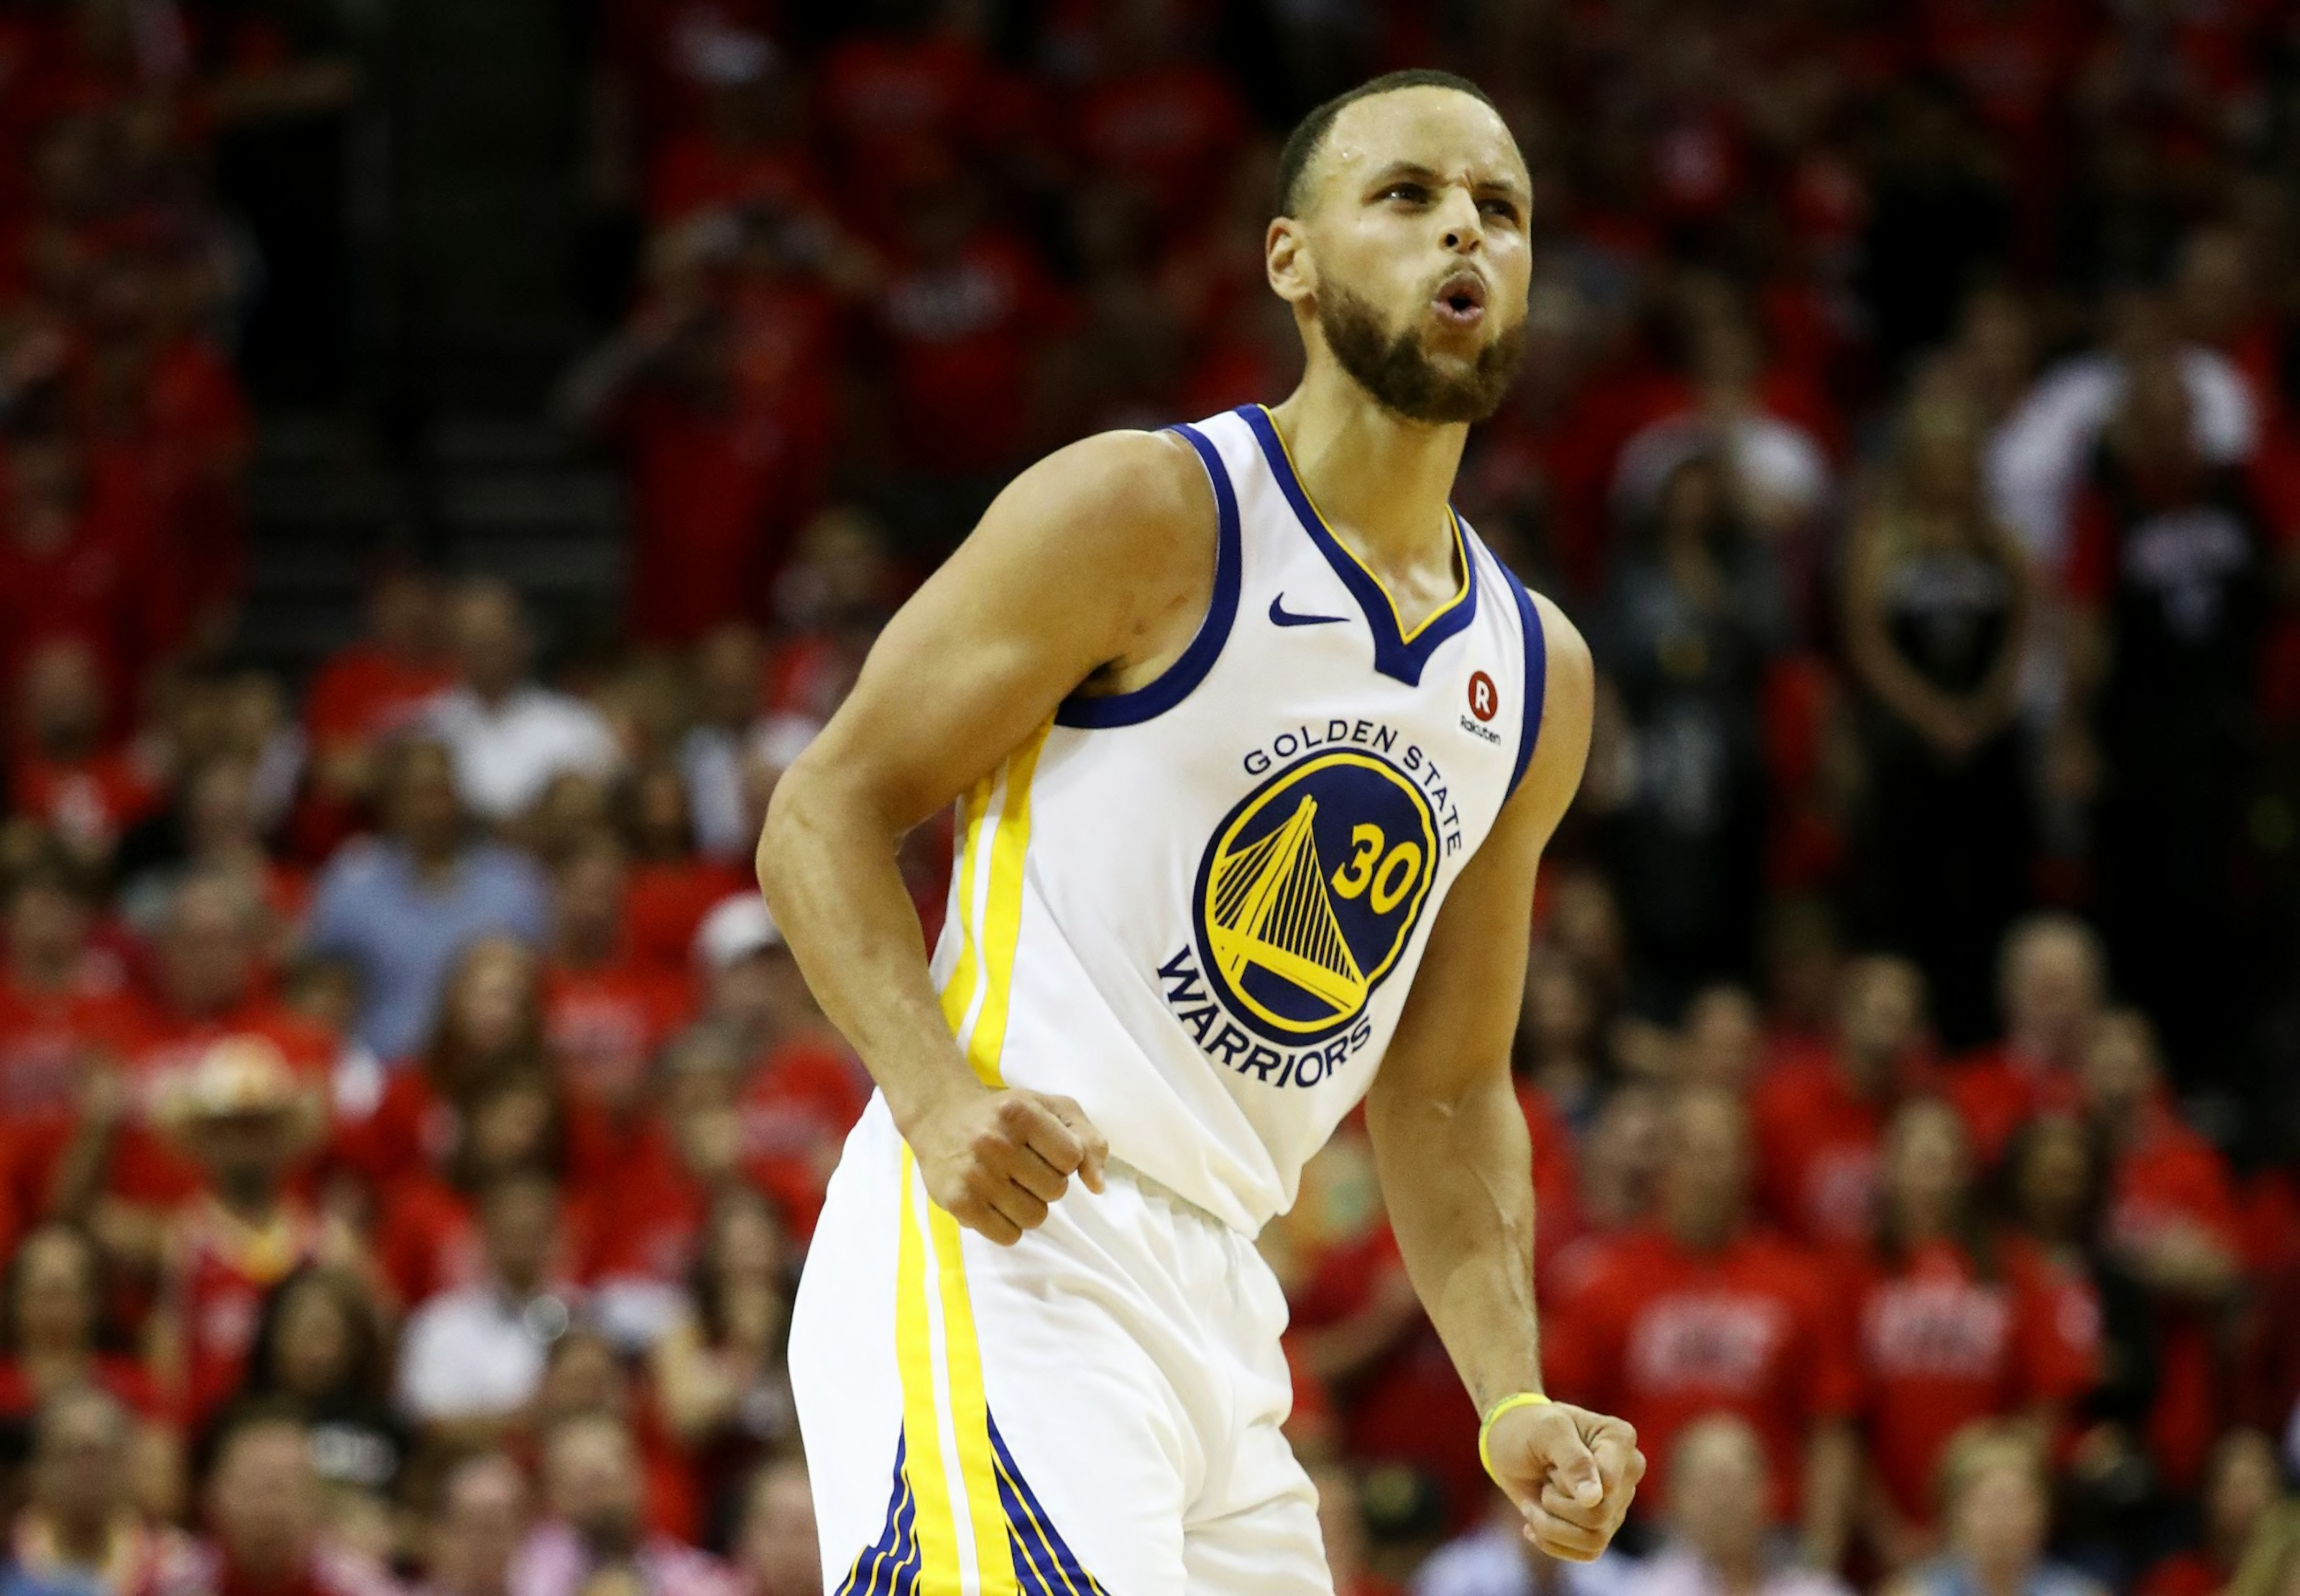 Return of Warriors guard Stephen Curry (foot) still undetermined